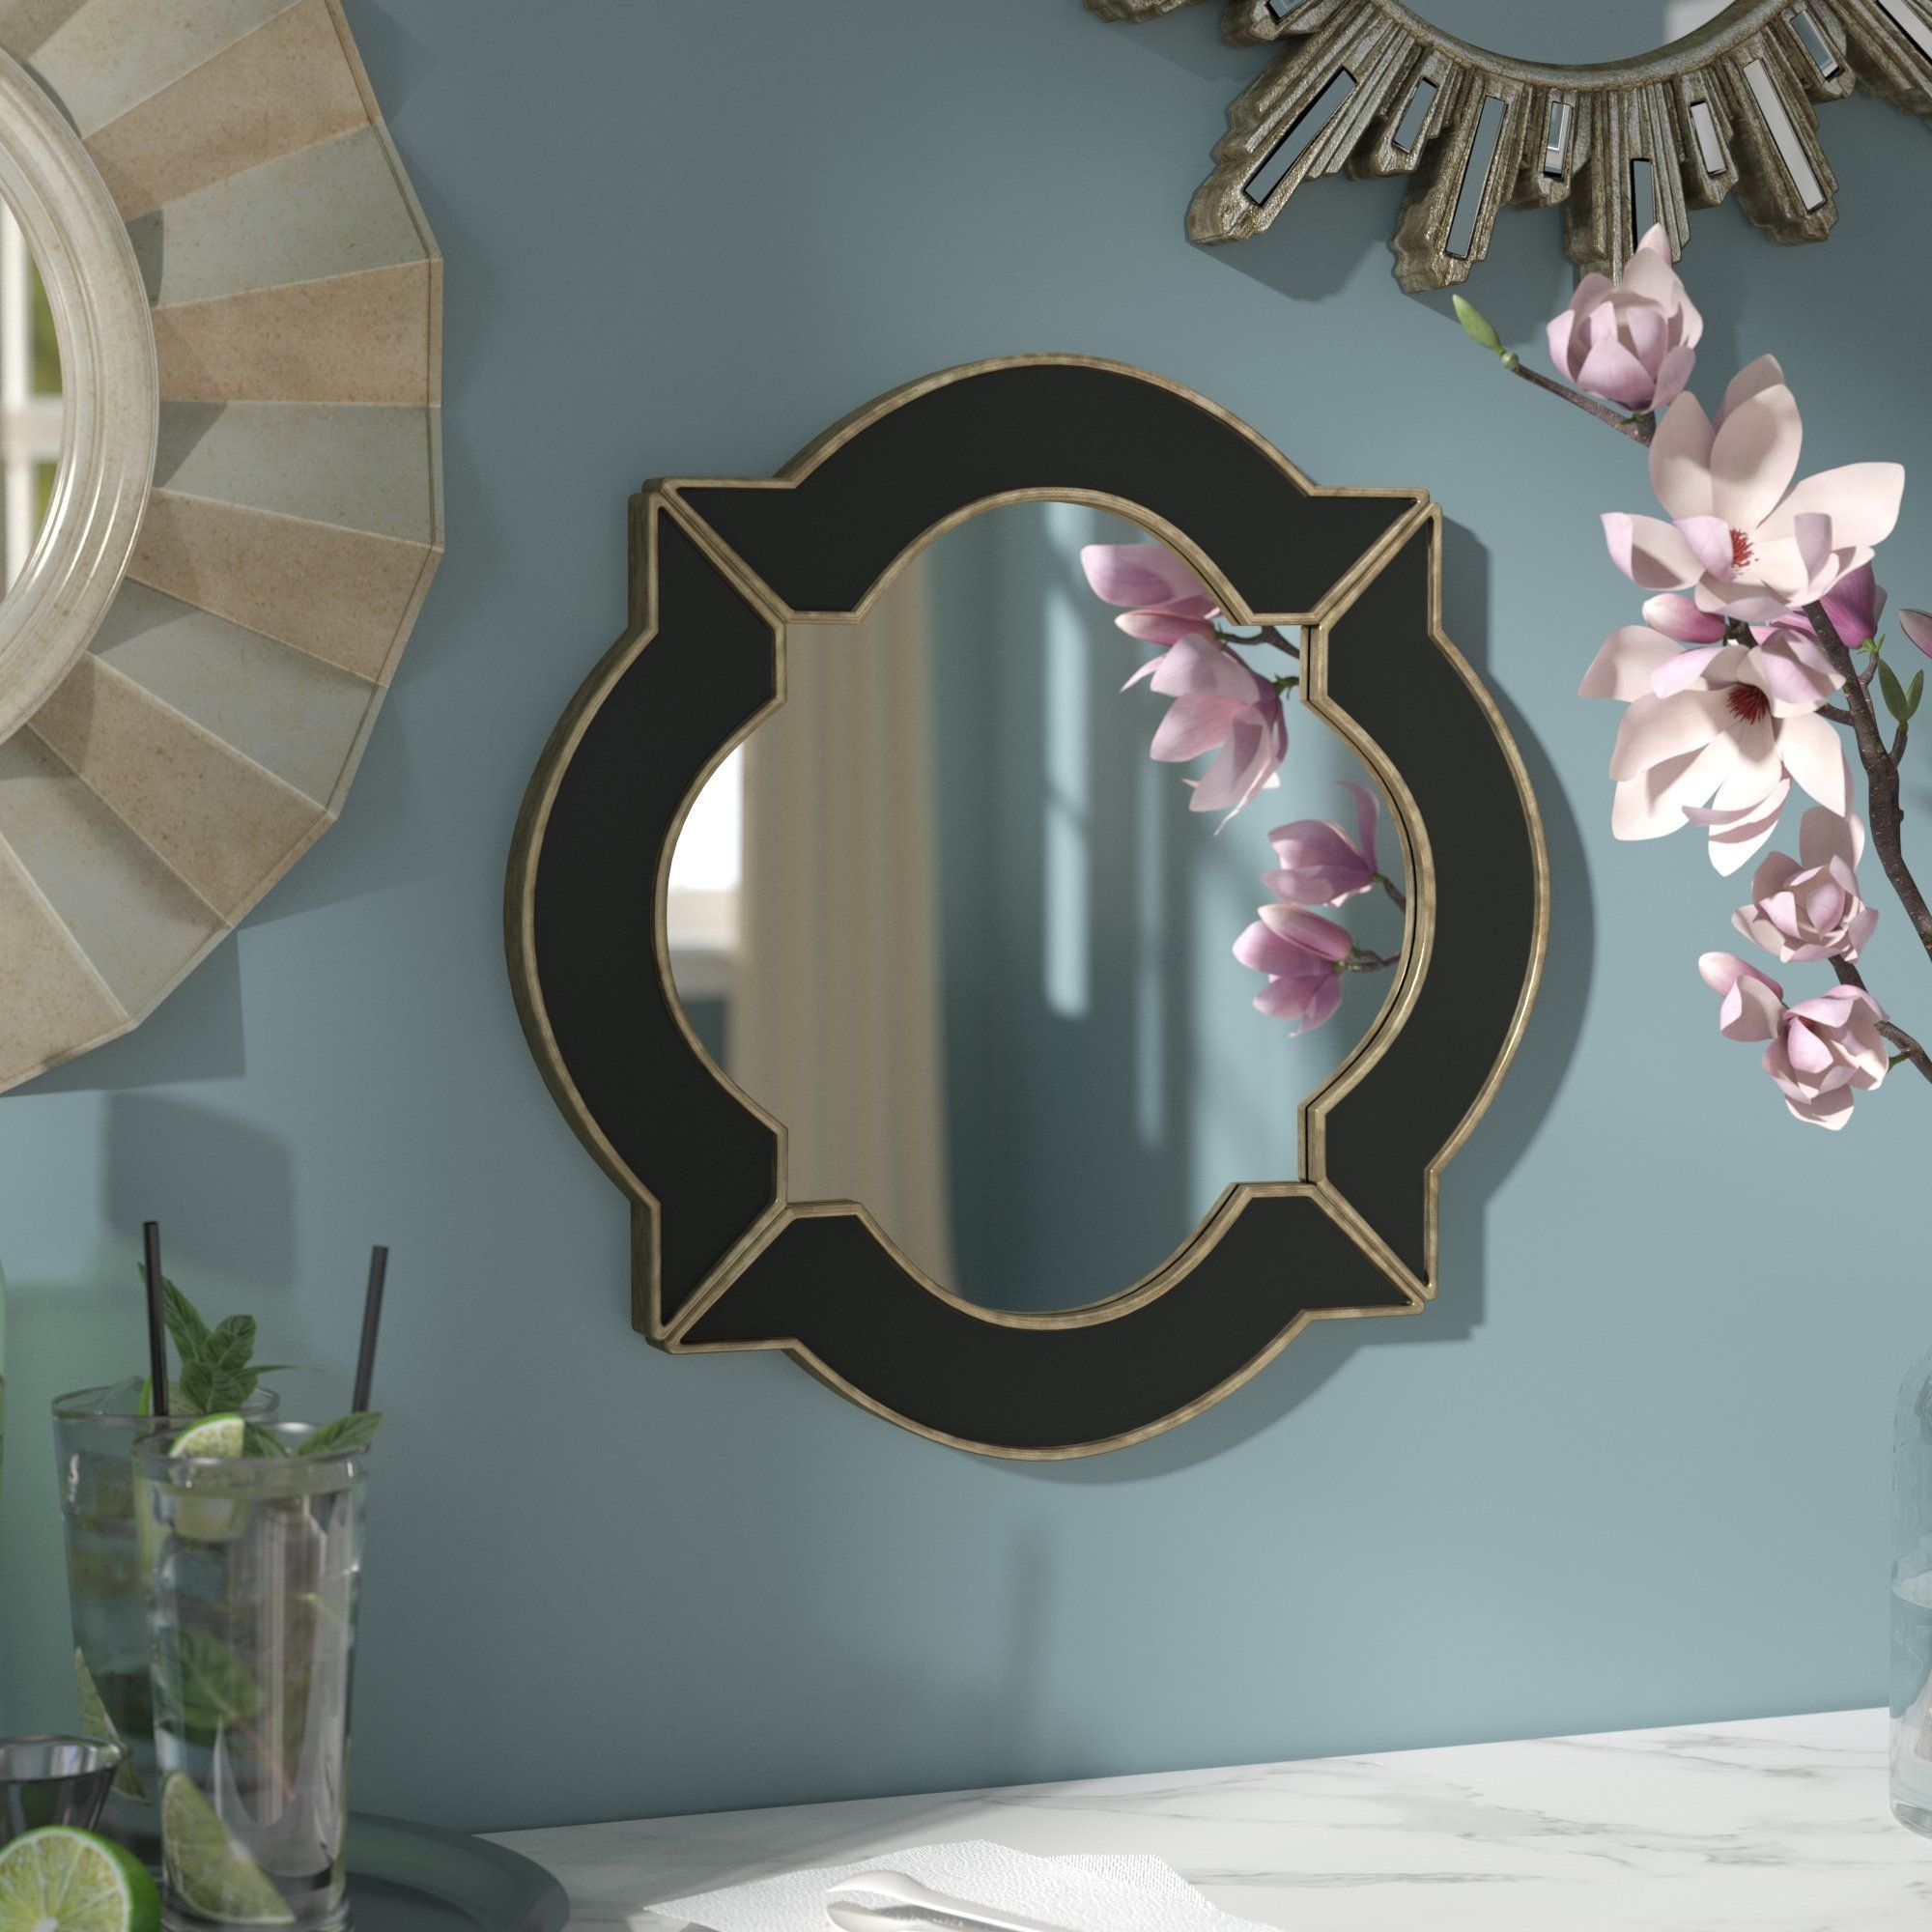 Carved Resin Mirror | Wayfair Throughout Gingerich Resin Modern & Contemporary Accent Mirrors (View 8 of 20)